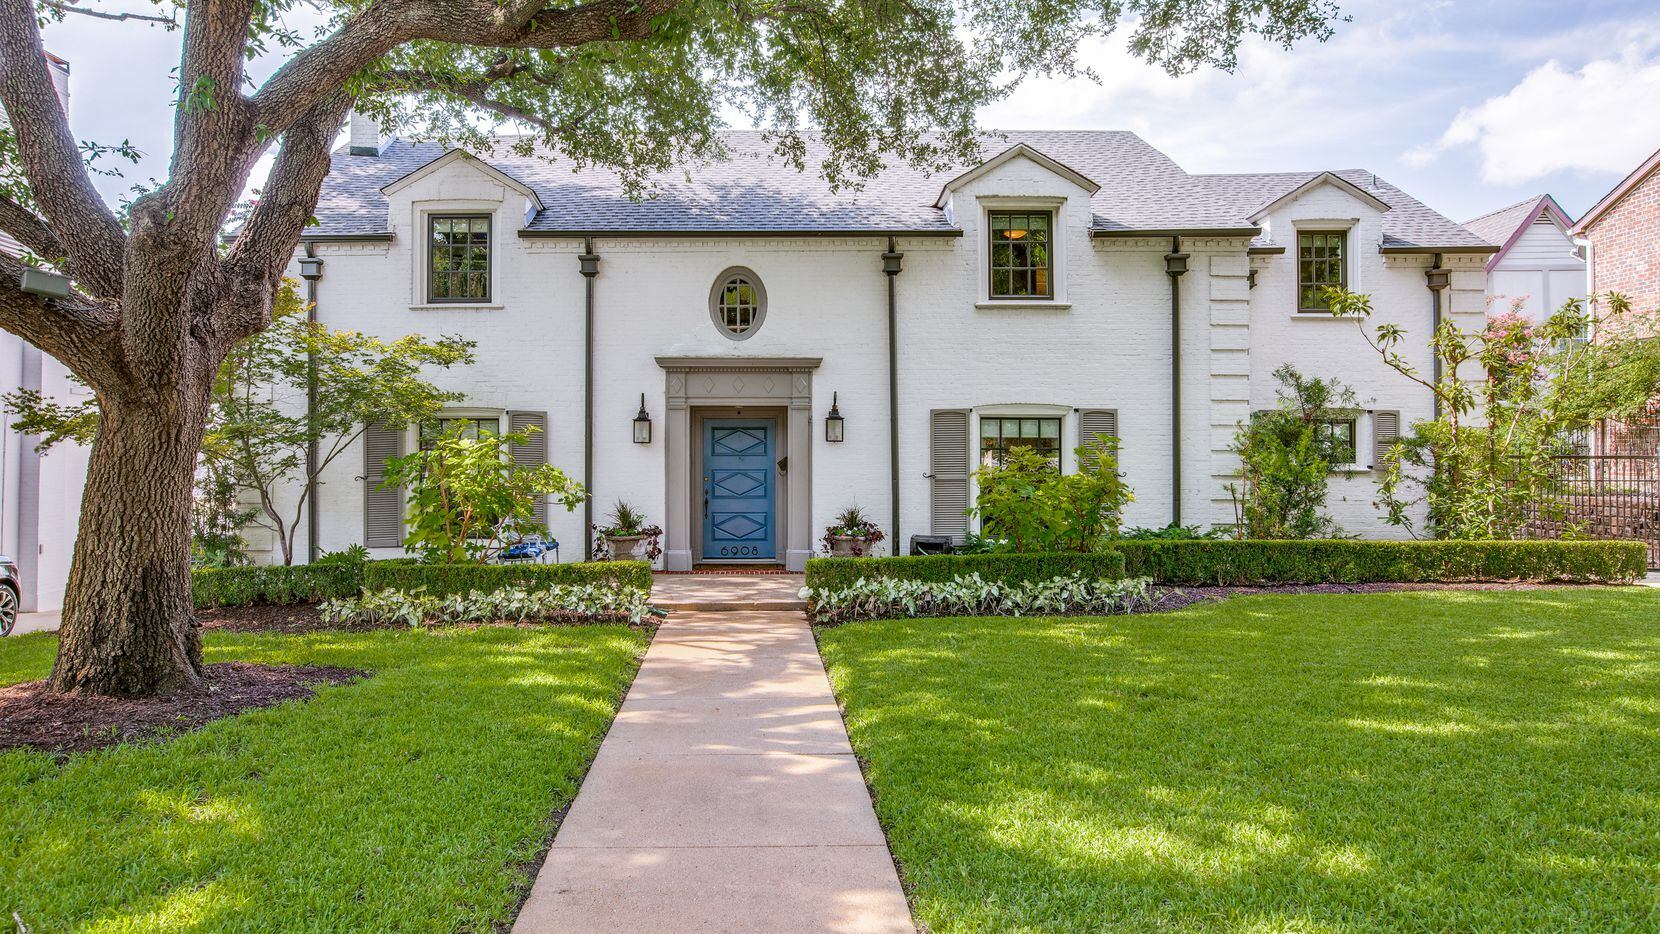 Take a look at the home at 6908 Lakeshore Drive in Dallas.